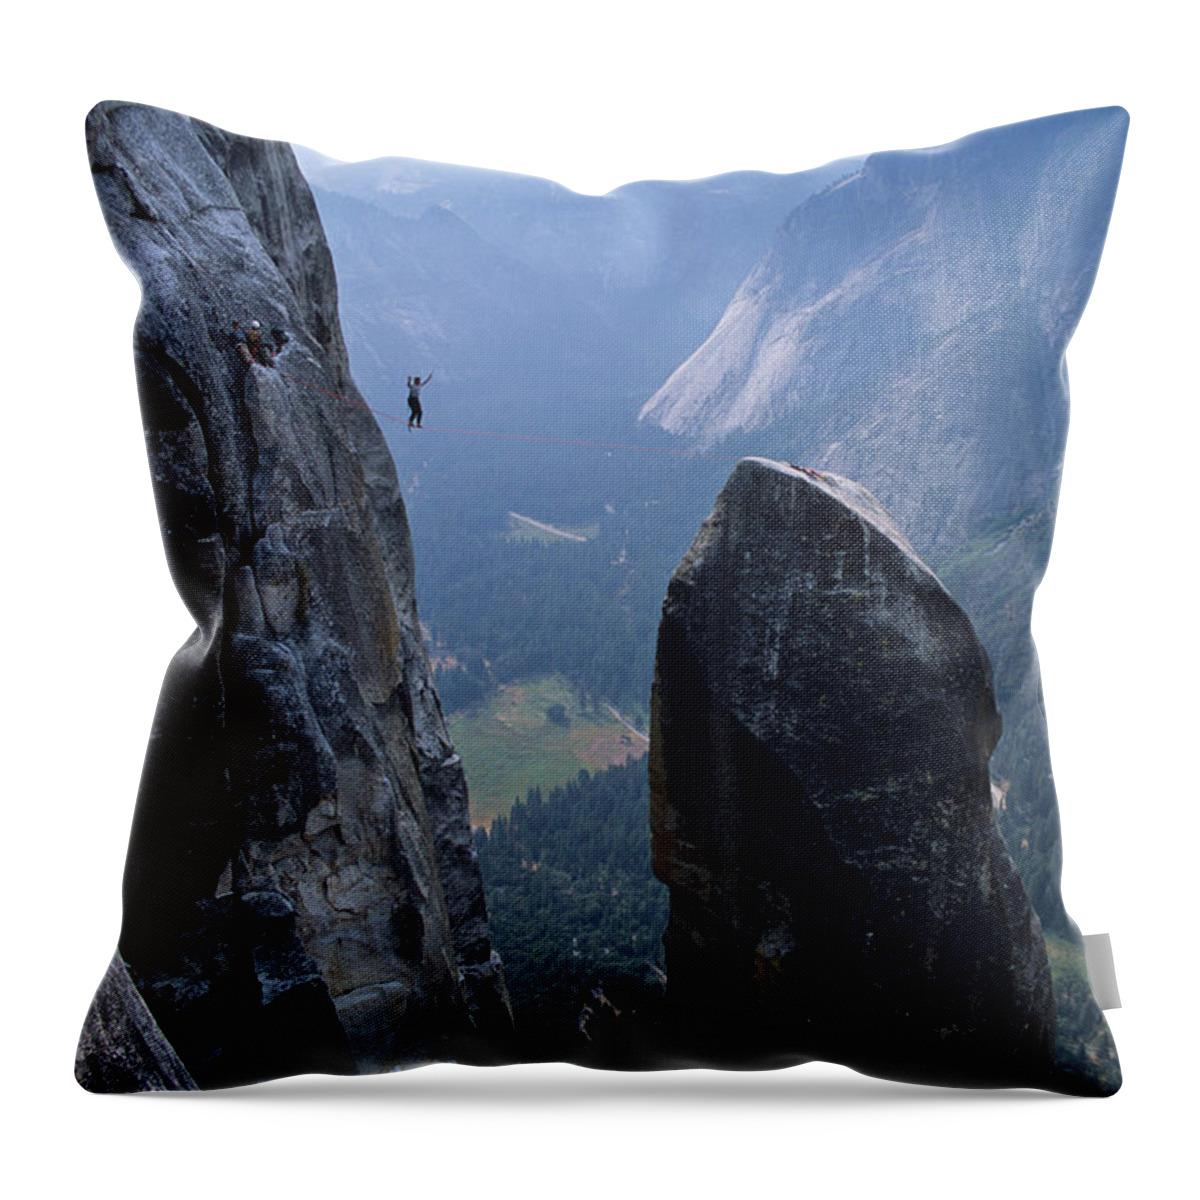 Tyrolean Traverse Throw Pillow featuring the photograph Careful by Michaelsvoboda